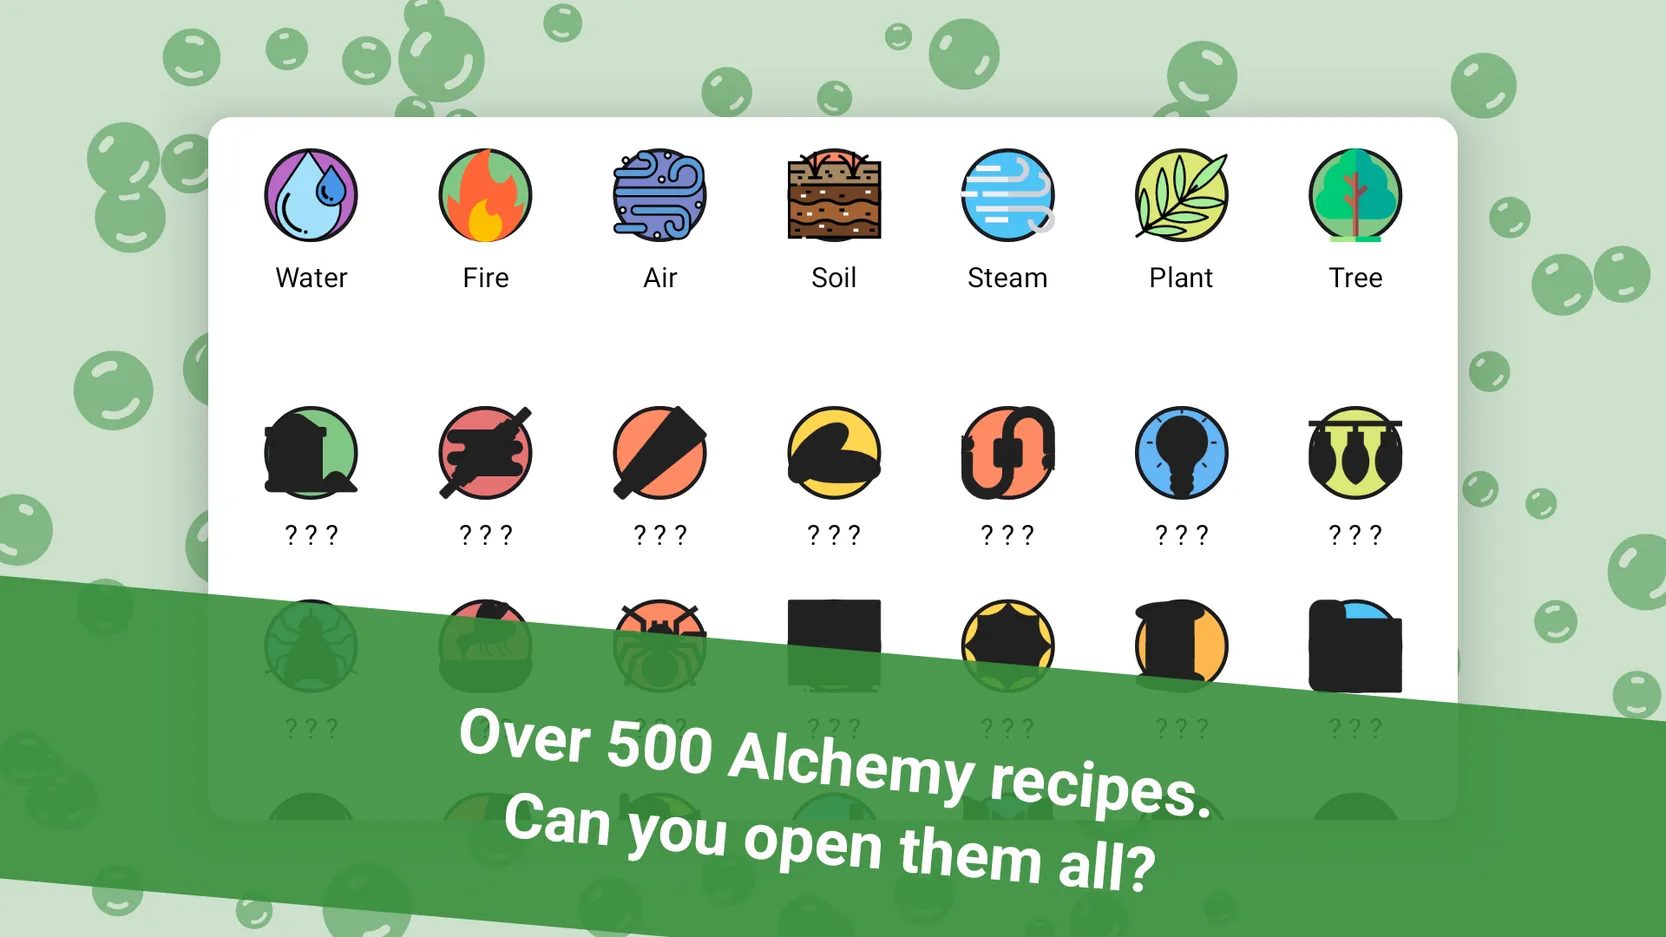 Little Alchemy 2' a, Game interface. Players can use the workspace